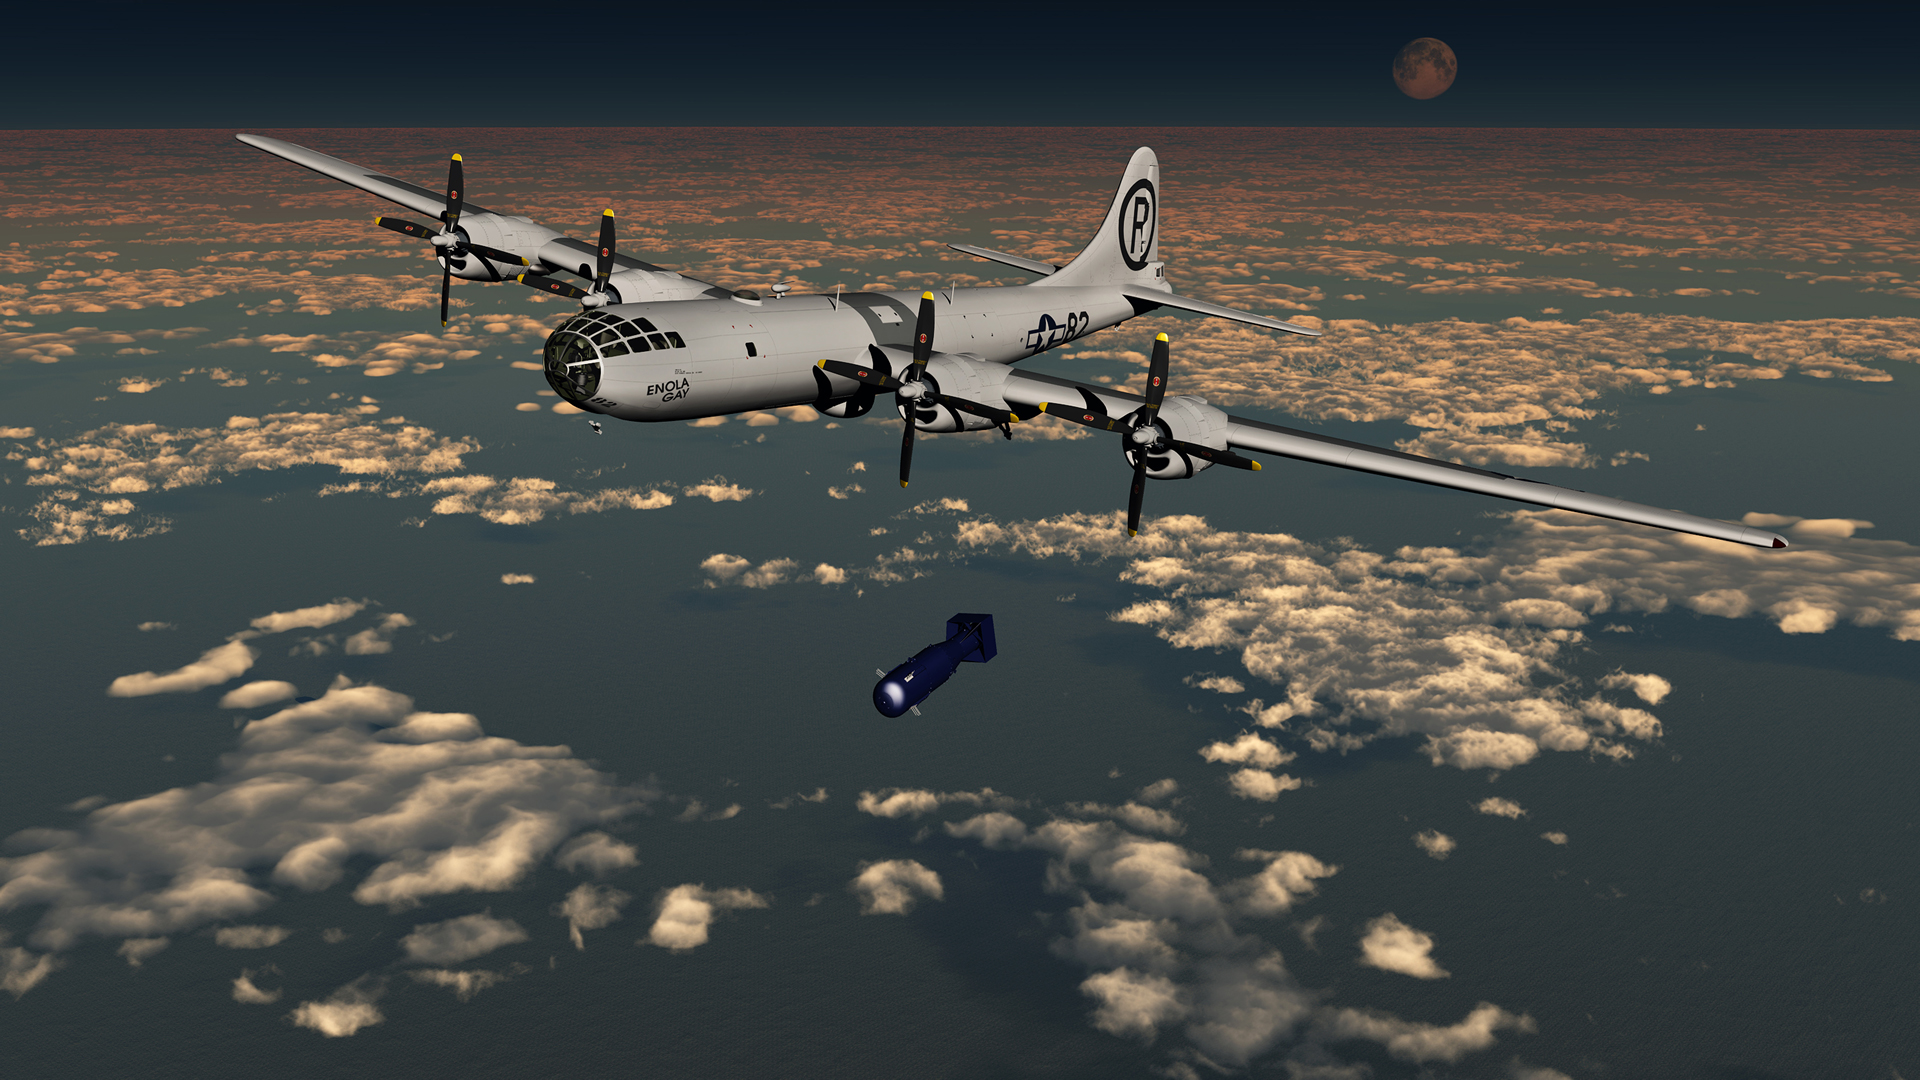 Enola Gay drops the world’s first atom bomb, over the city of Hiroshima